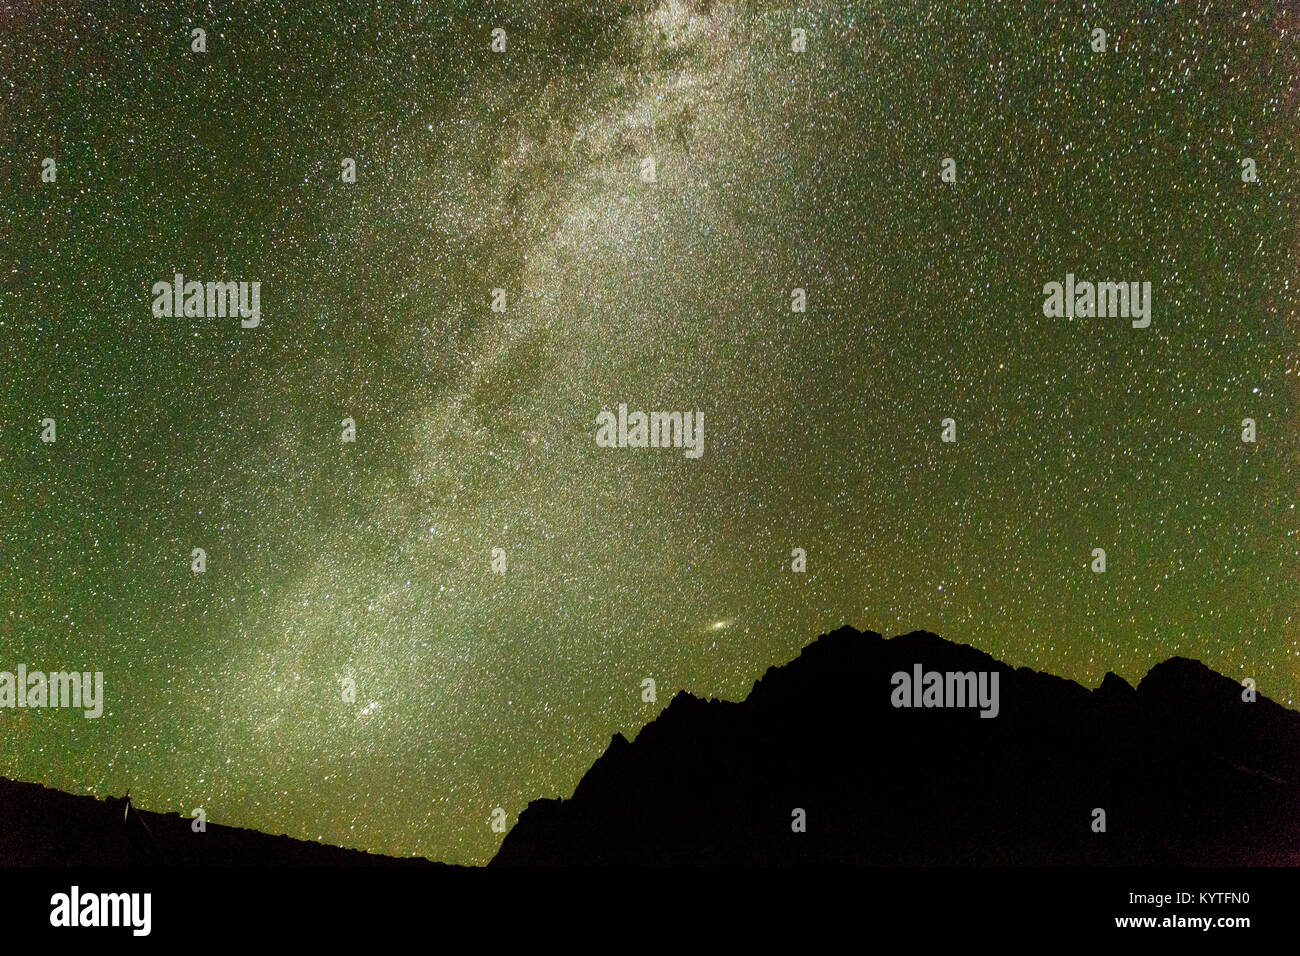 Milky way galaxy as seen from Satsar Campsite on the Kashmir great lakes trek at Sonamarg, Jammu and Kashmir, India. Sky full of Stars, Astro photo Stock Photo